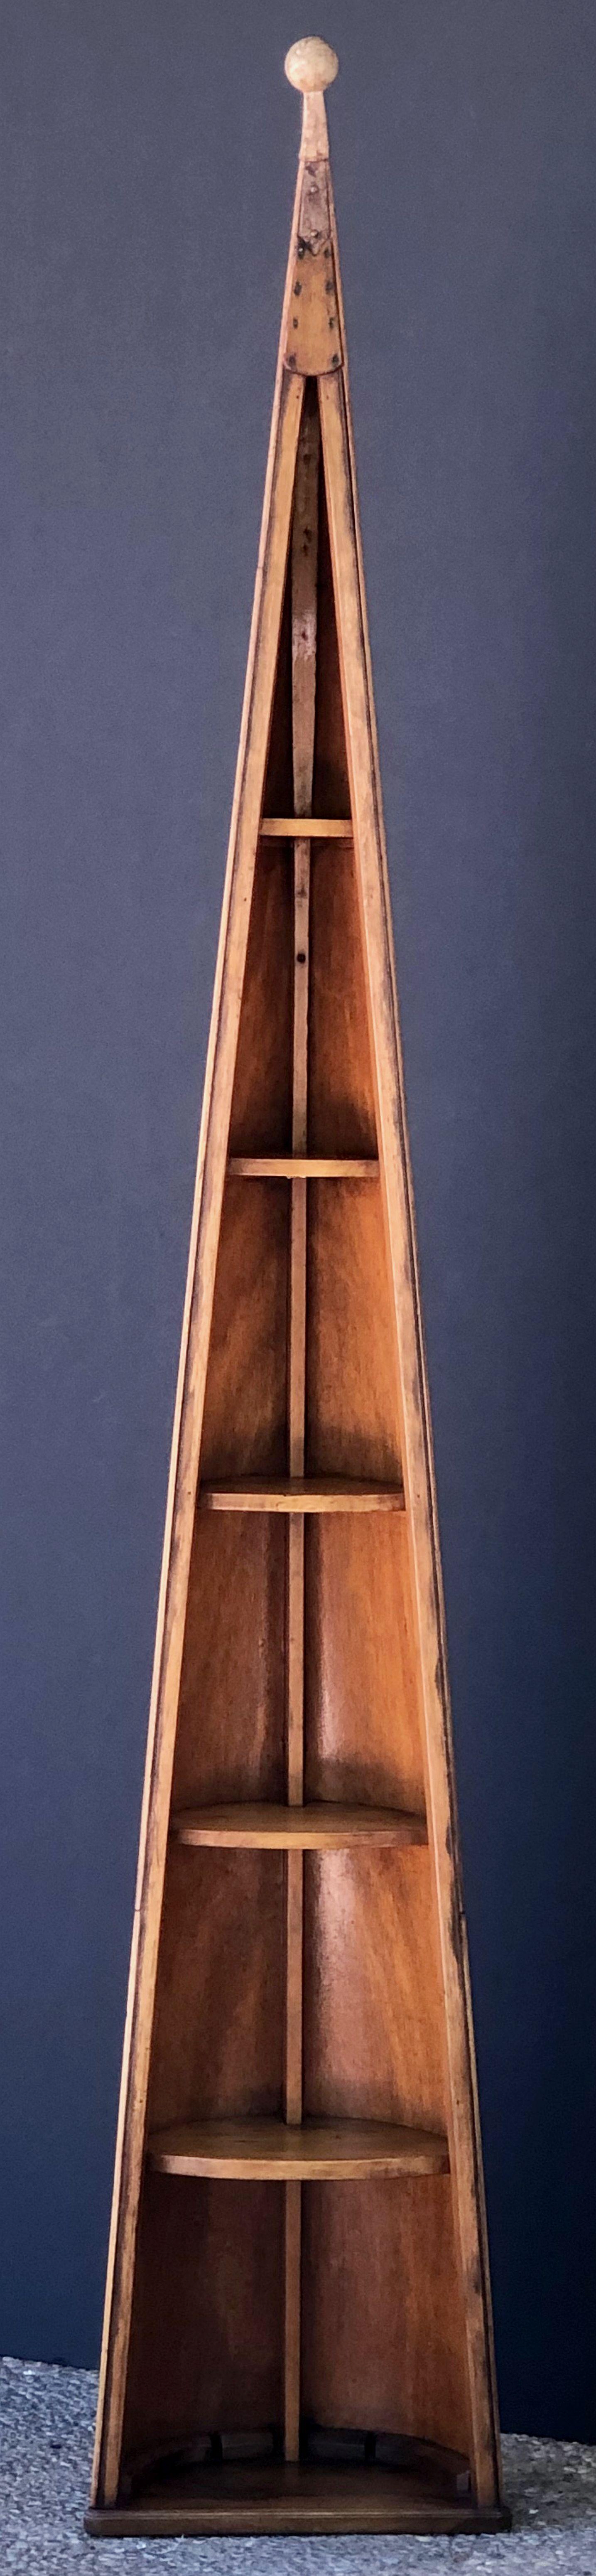 A fine English boat shelving unit or bookcase of mahogany, fashioned from a row boat skiff, or canoe, with six shelves of graduating size.

Marked: Thor

Dimensions:

Measures: H 88 inches
W 15 1/2 inches
D 9 inches

Great for a fishing